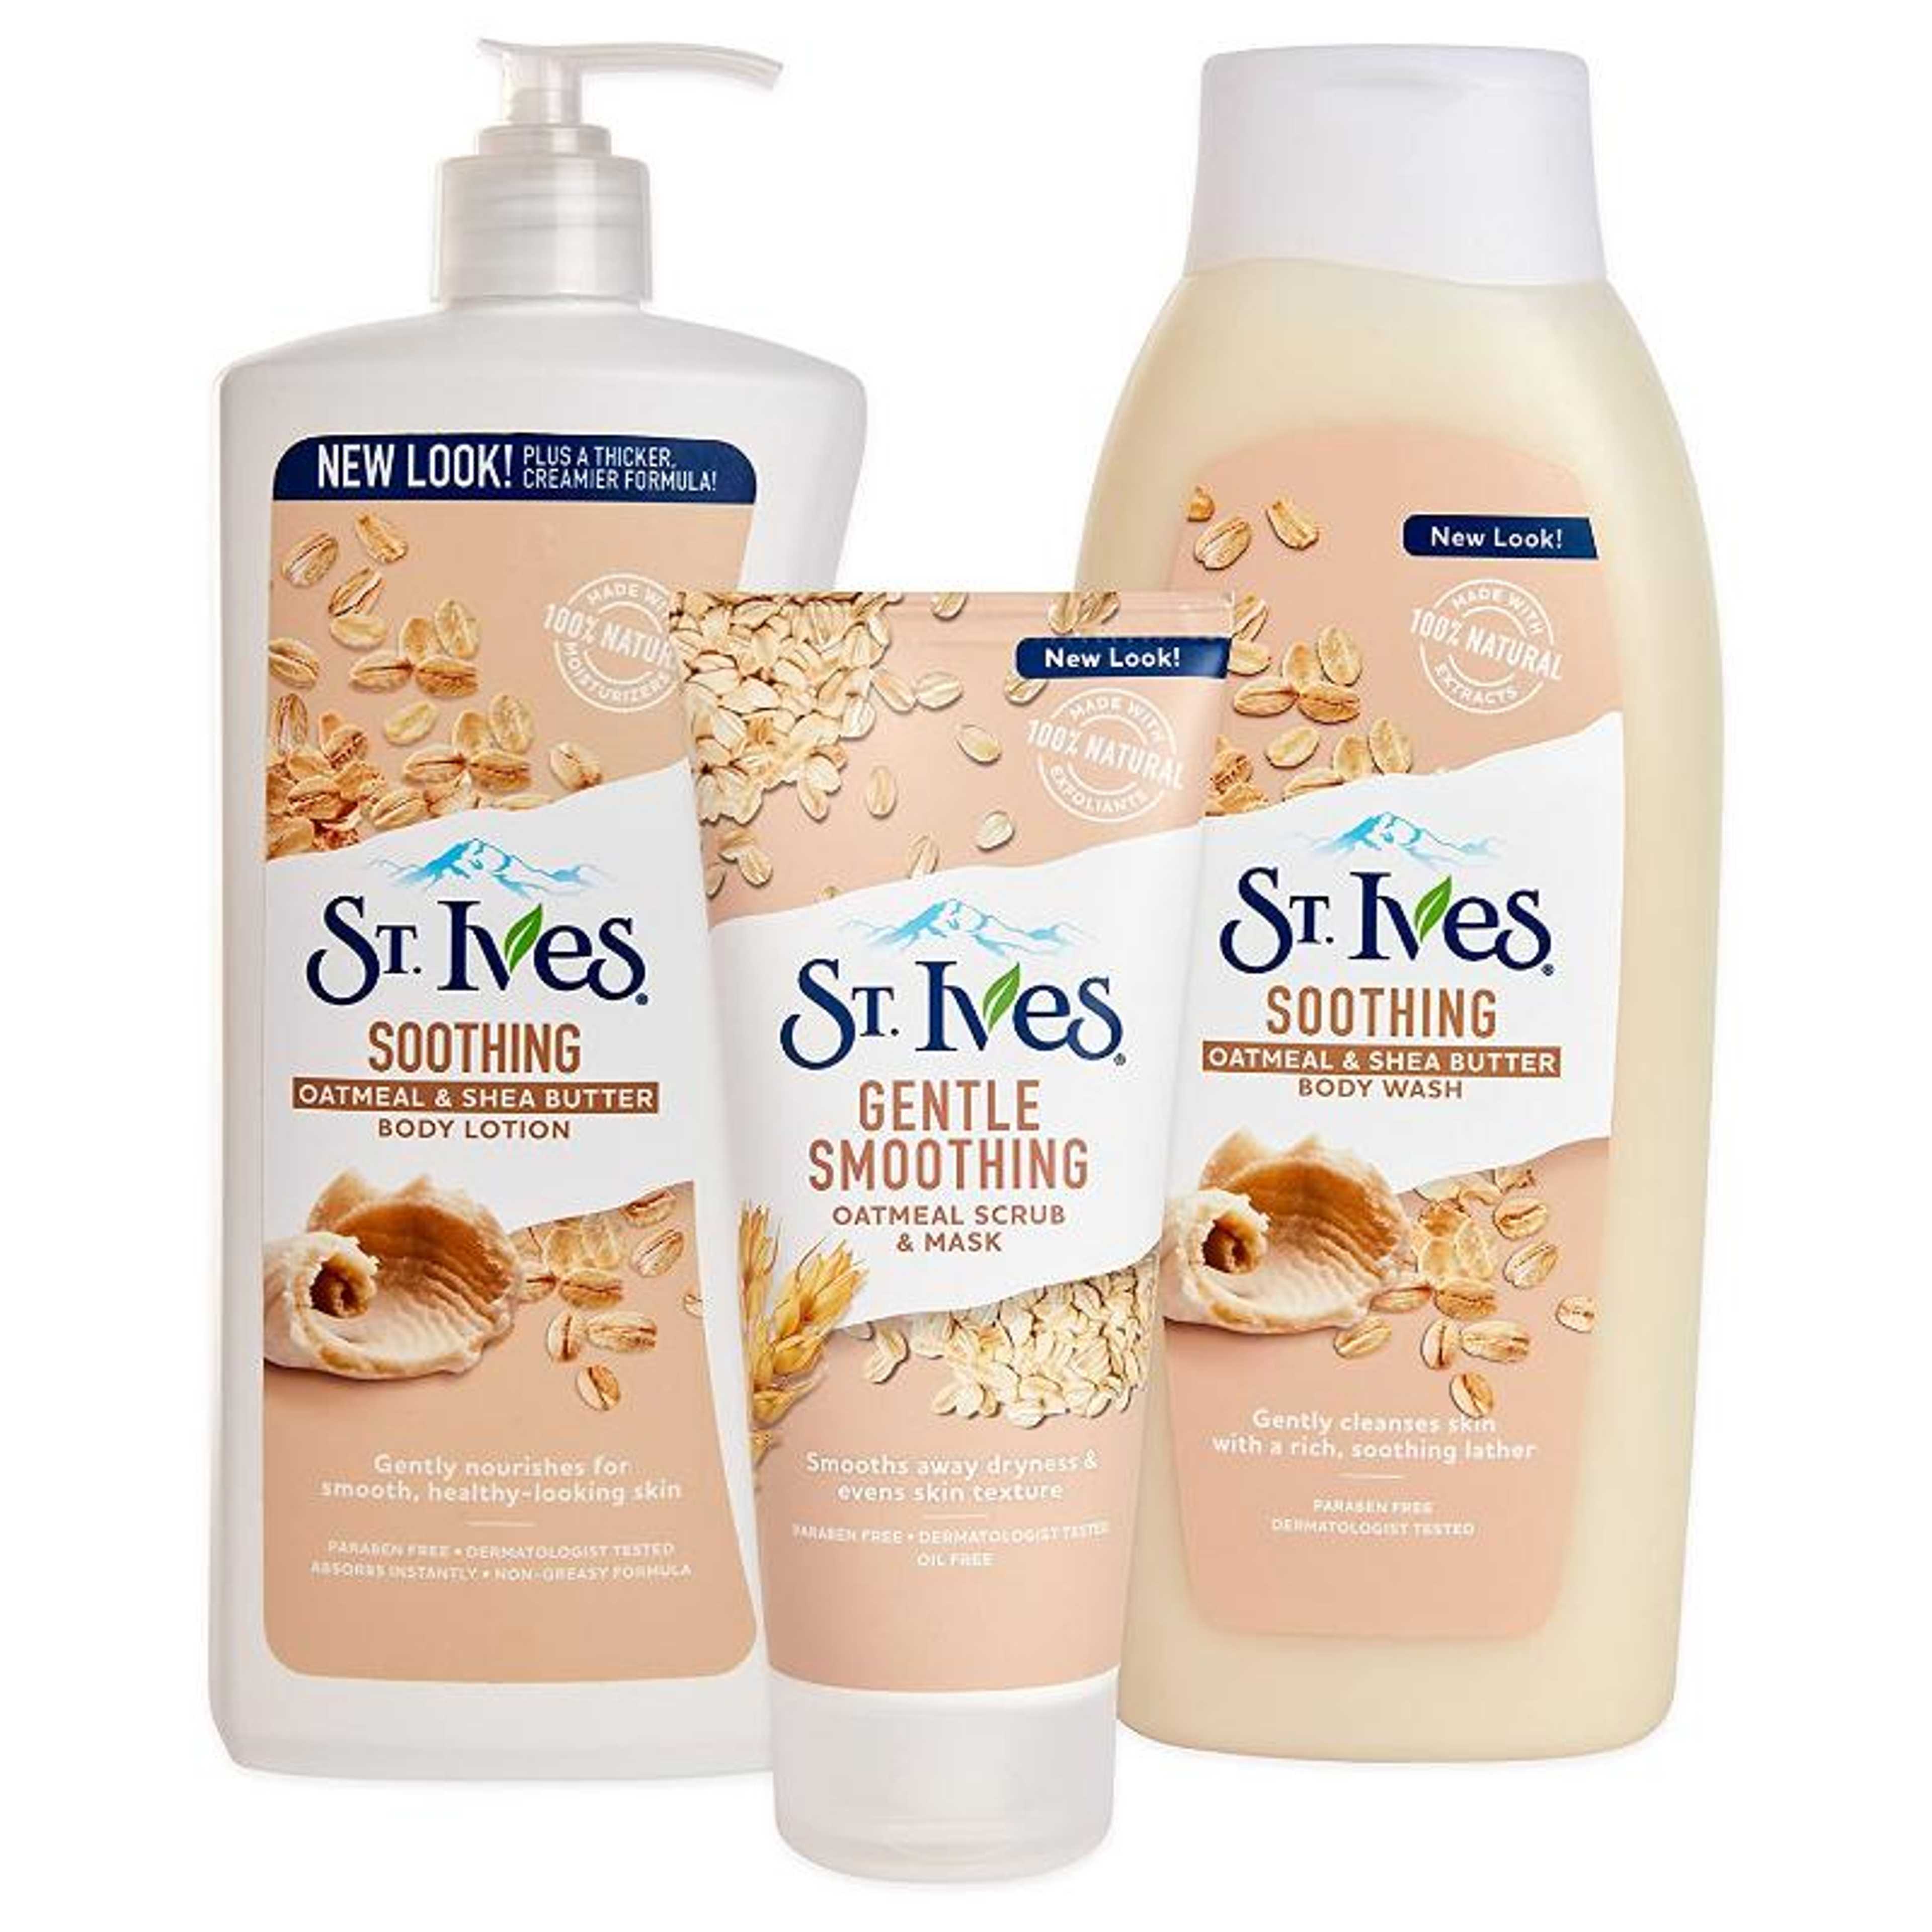 "St Ives Soothing Oatmeal & Shea Body Lotion "